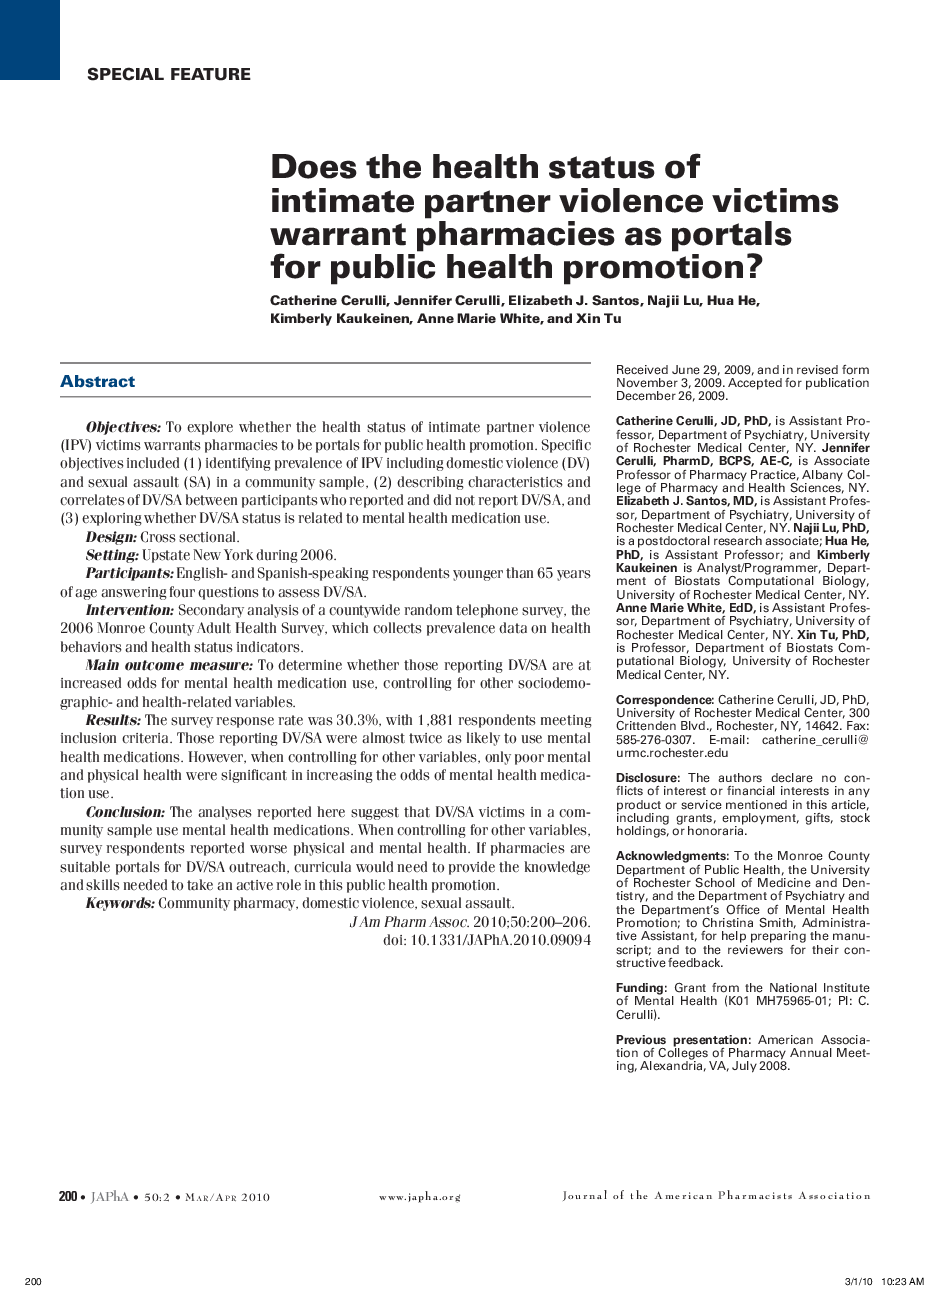 Does the health status of intimate partner violence victims warrant pharmacies as portals for public health promotion?